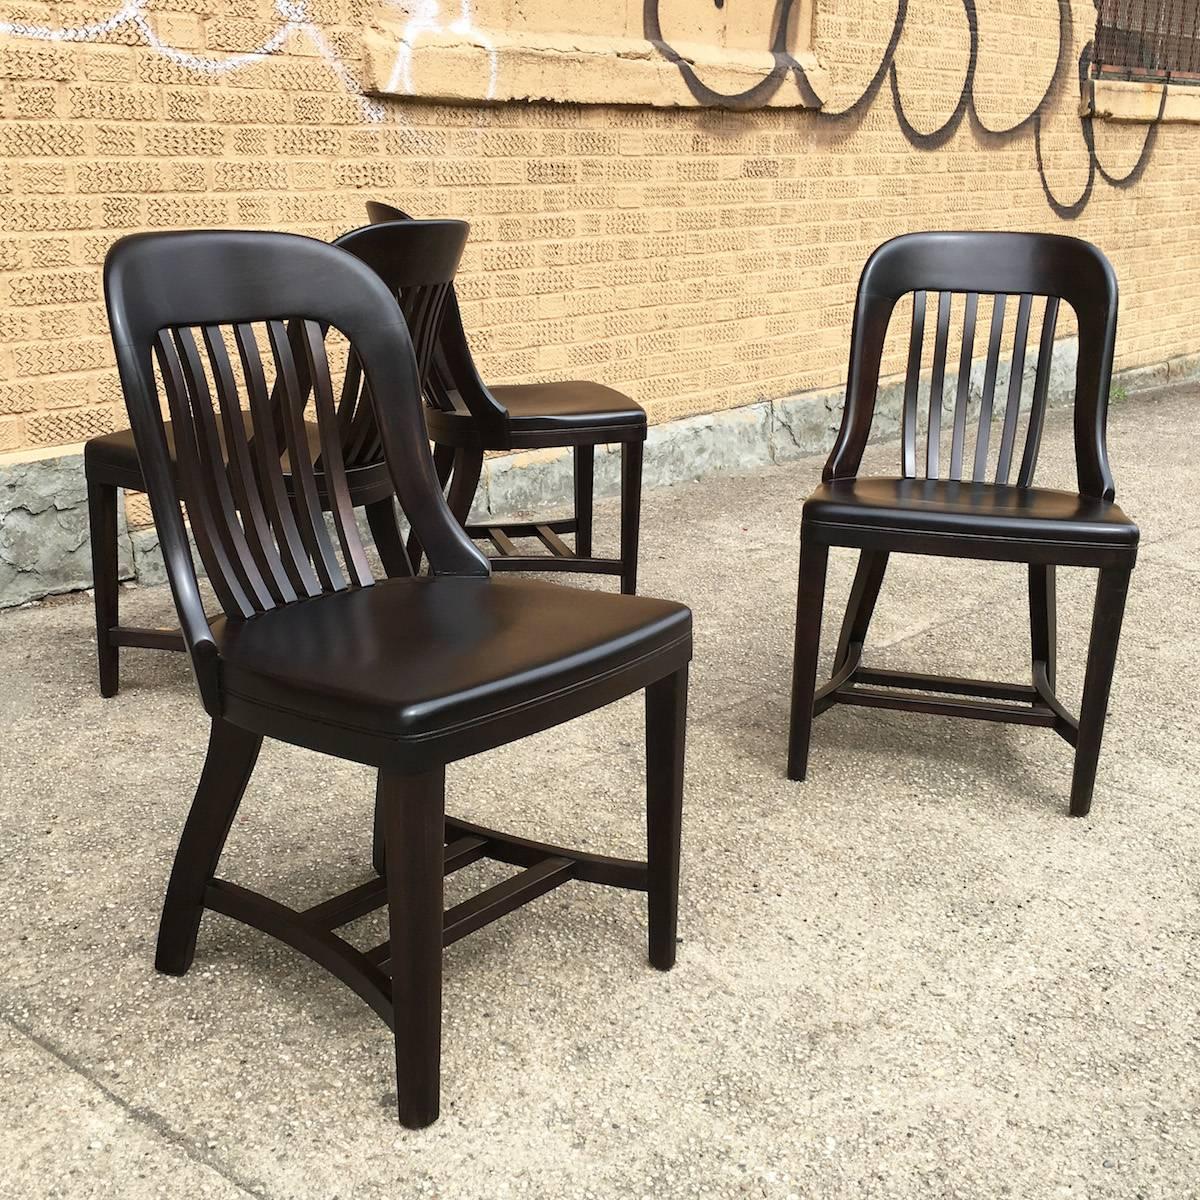 Bank of England, courthouse, maple, side chair by Gunlocke Chair Company is newly restored in an ebonized finish.